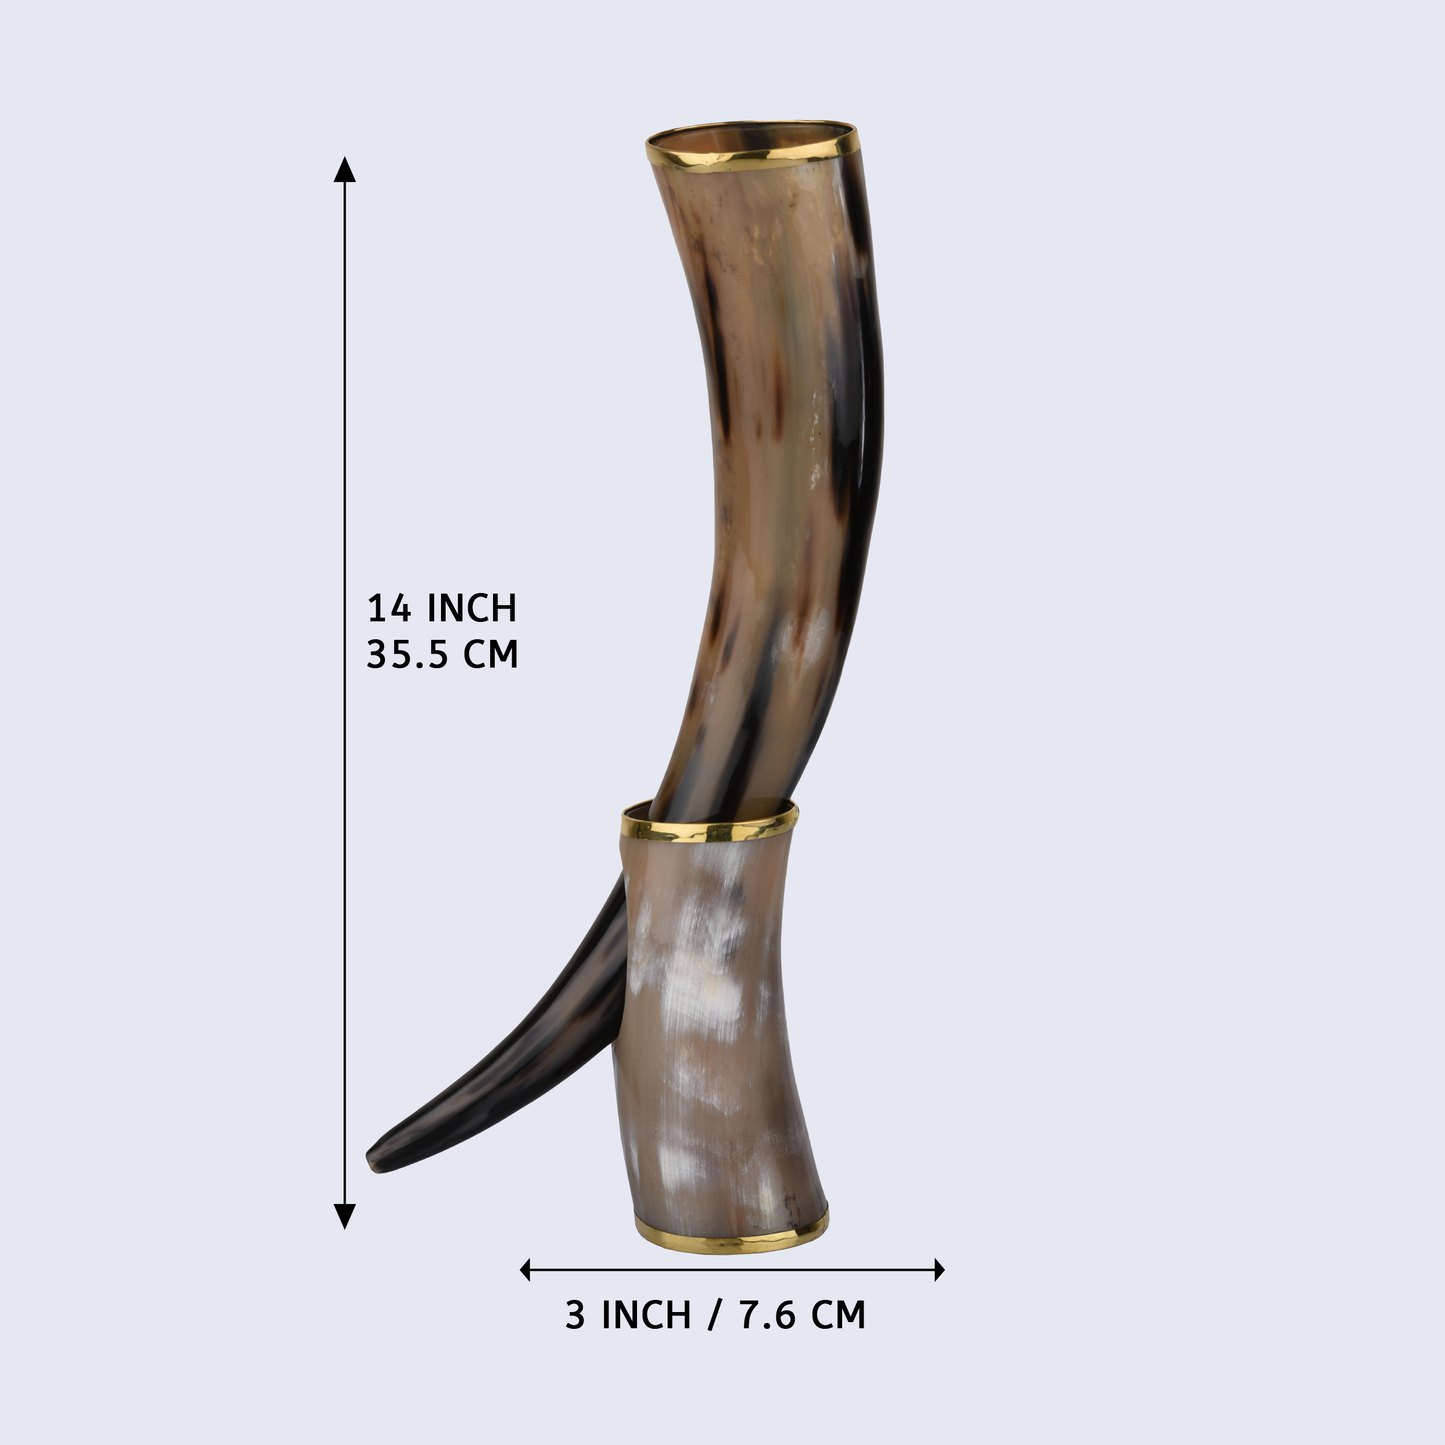 Metallic Touch Real Viking Drinking Horn with Stand Cups Vessels, 14 inches